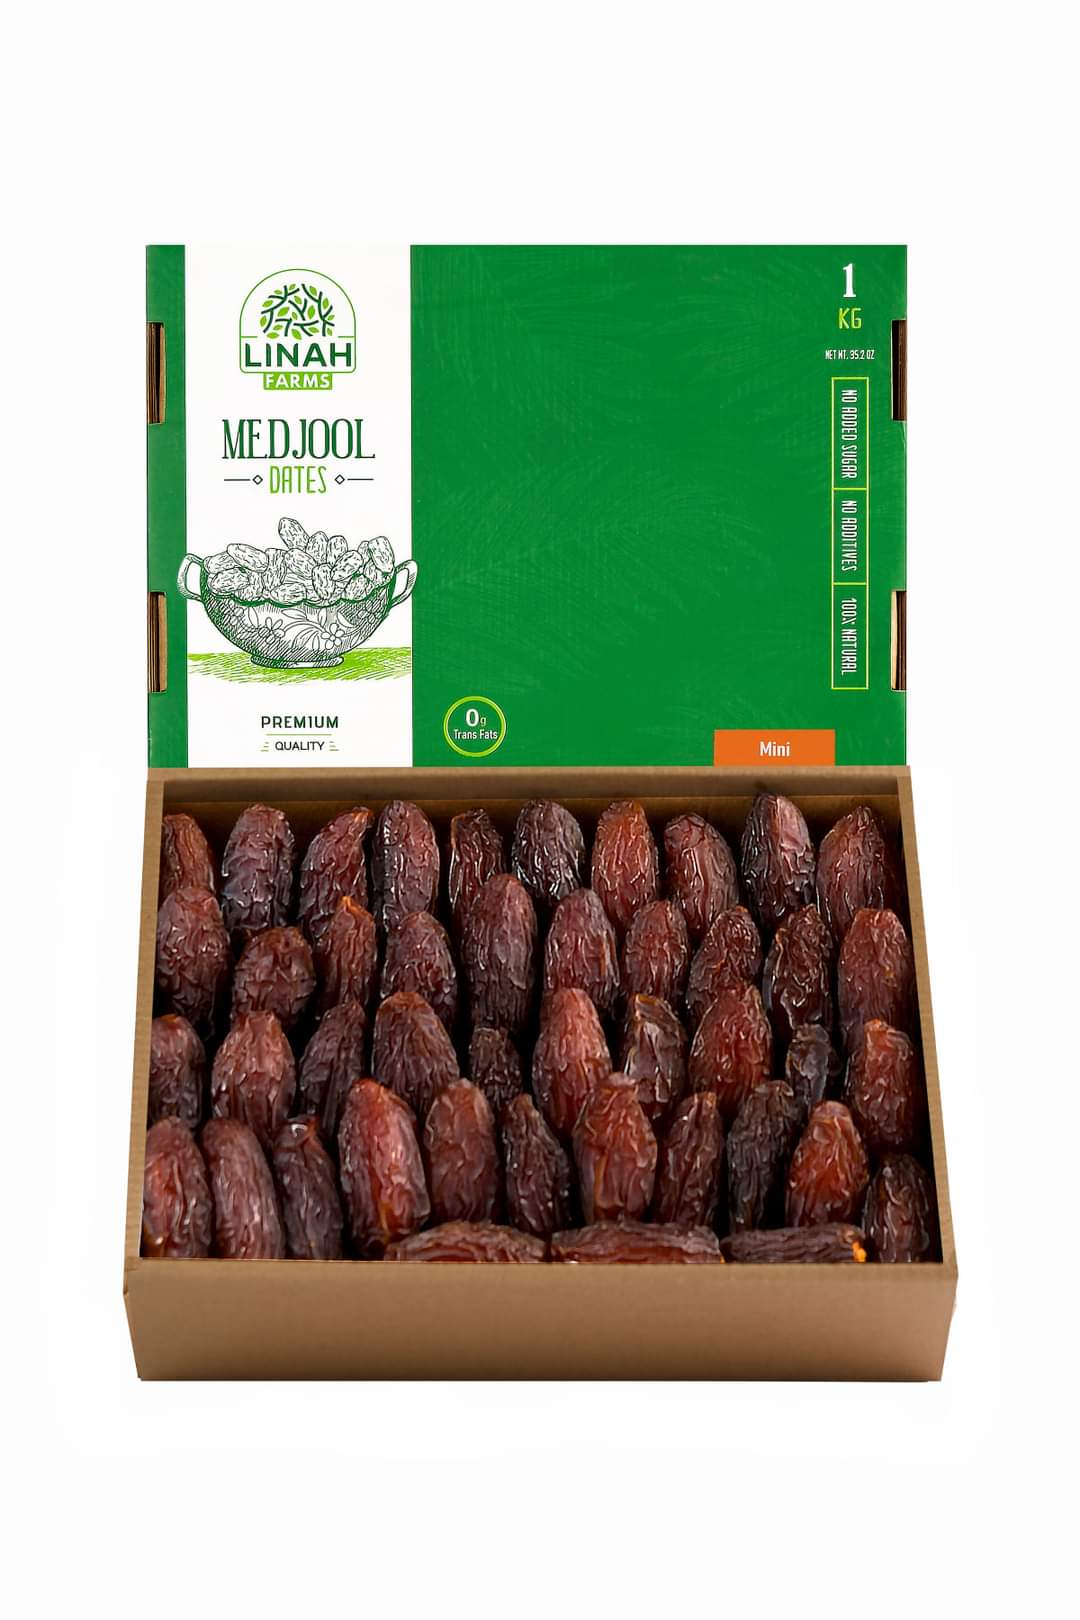 1.0kg box of Linah Farms mini Medjools with open box displaying the dates.